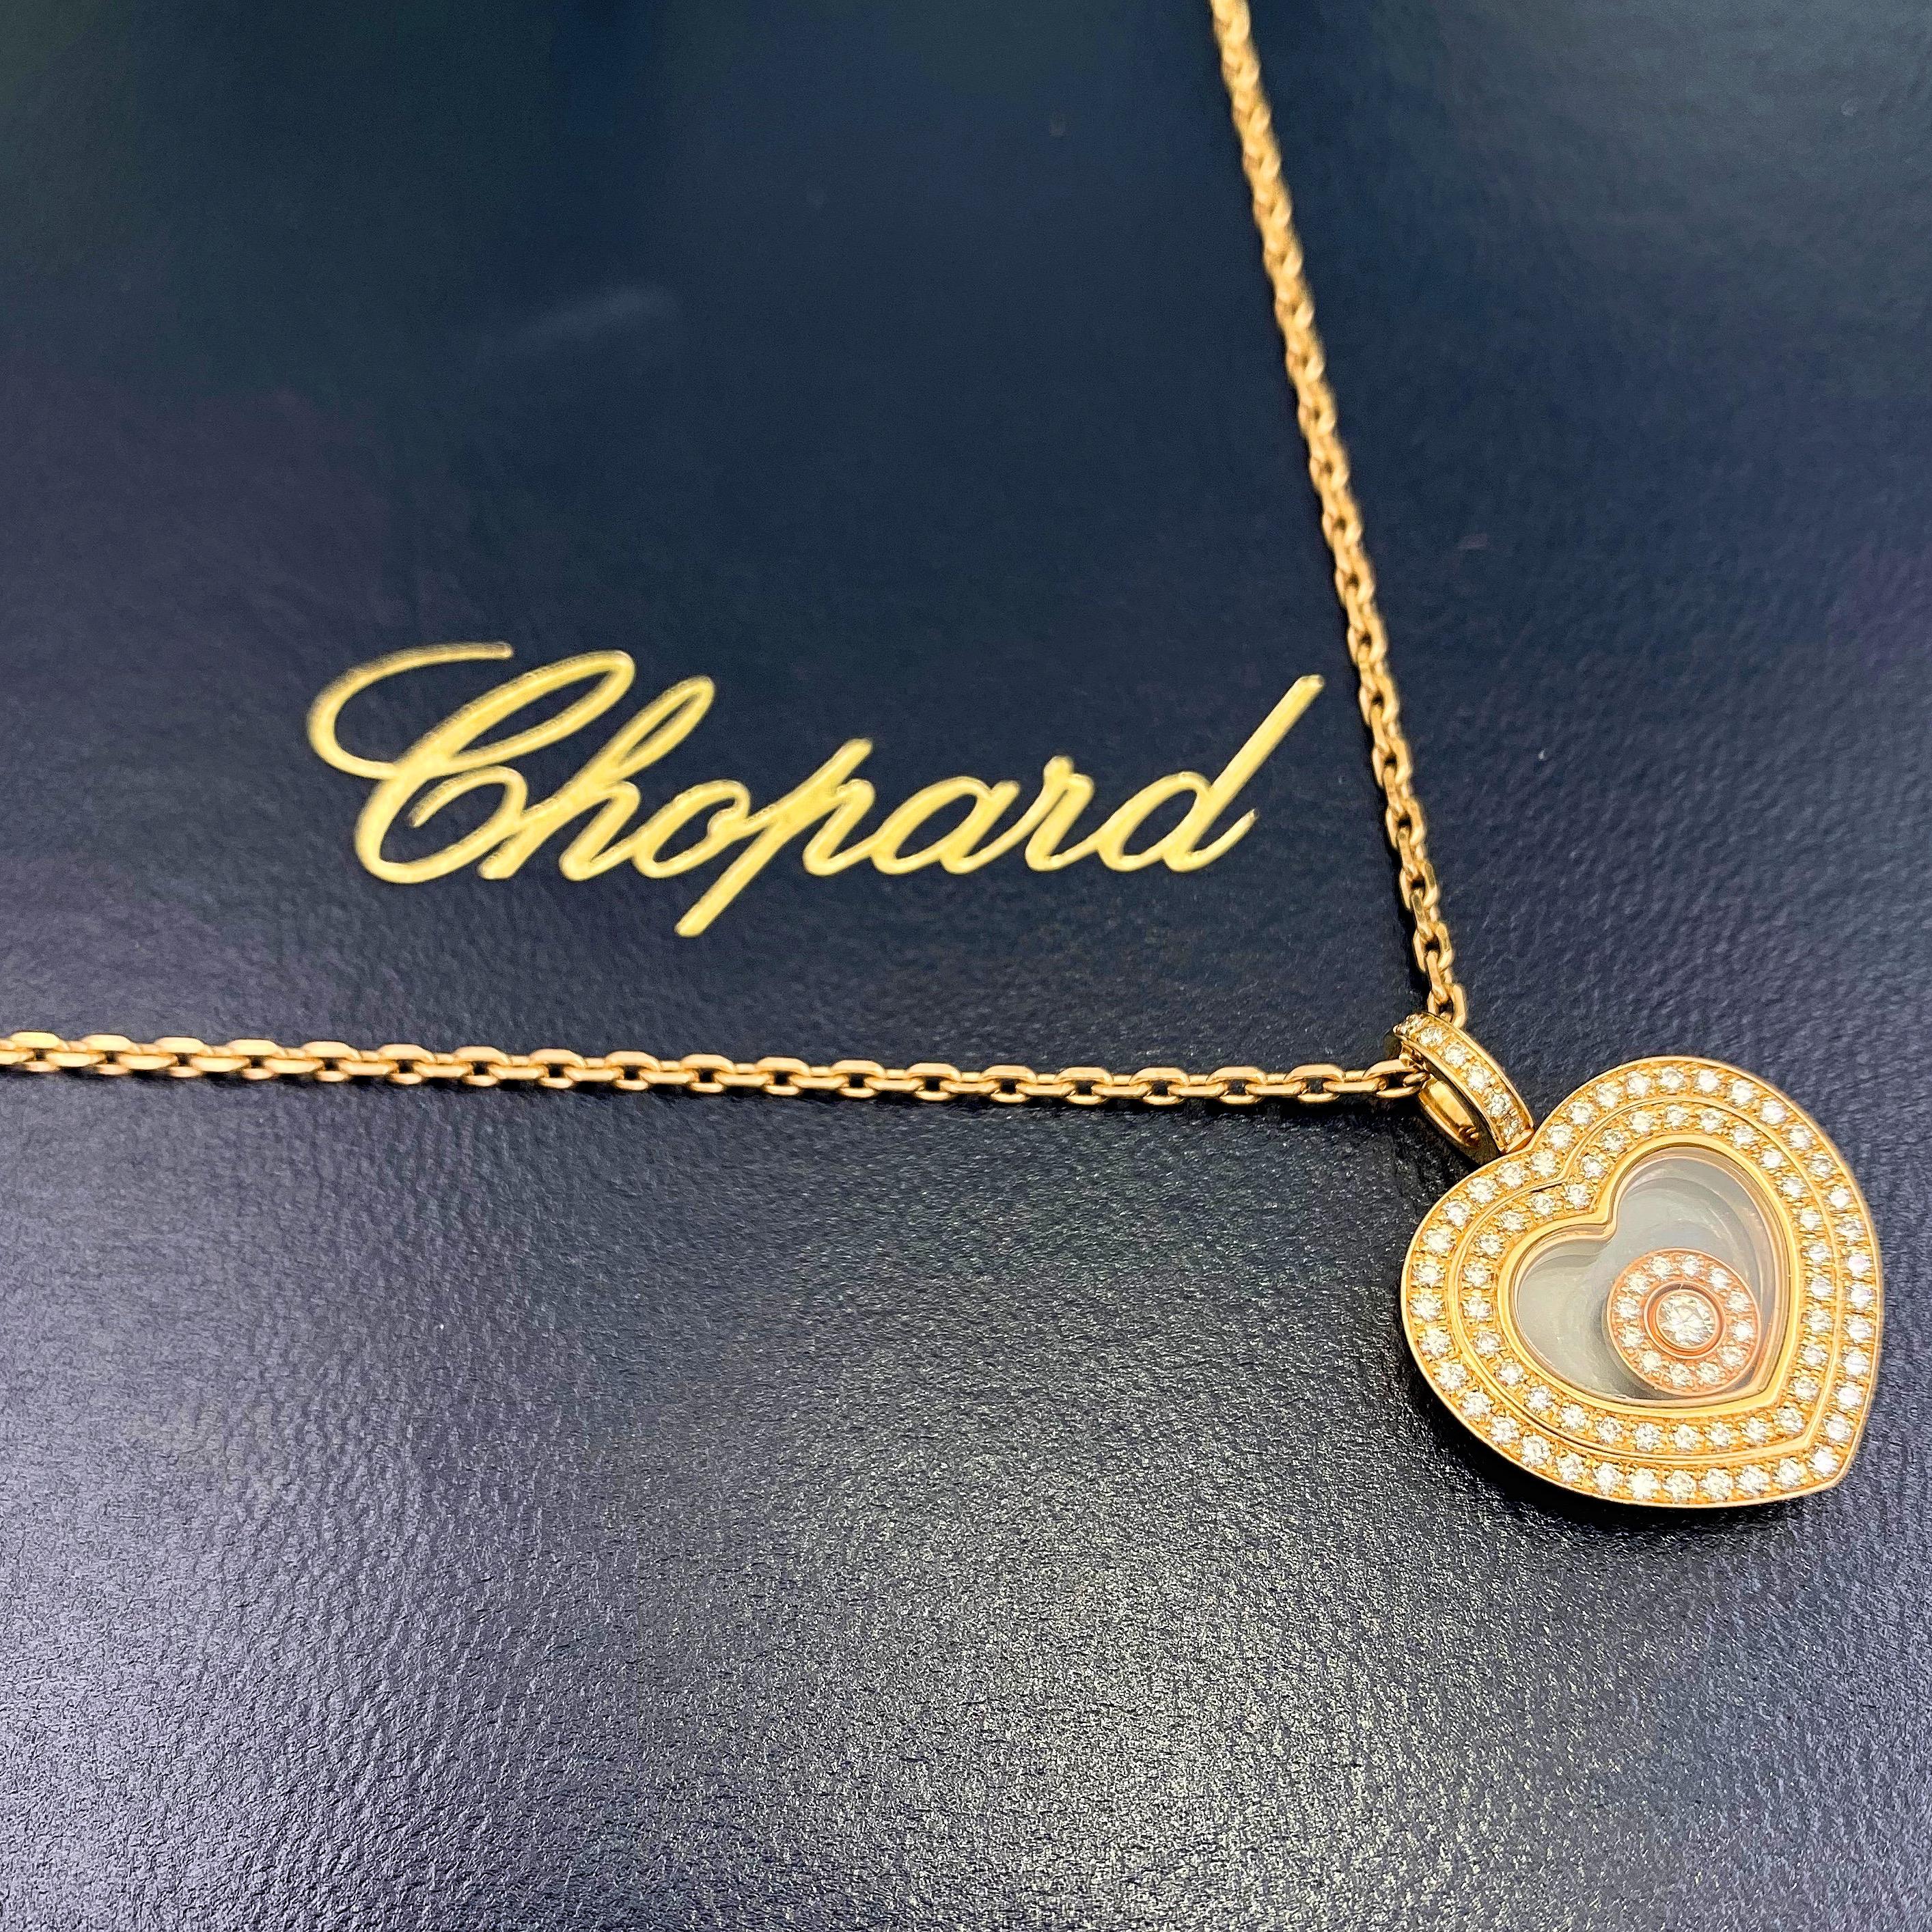 Chopard Happy Hearts Diamond Rose Gold Pendant Necklace 18 Karat Box In Excellent Condition For Sale In San Diego, CA